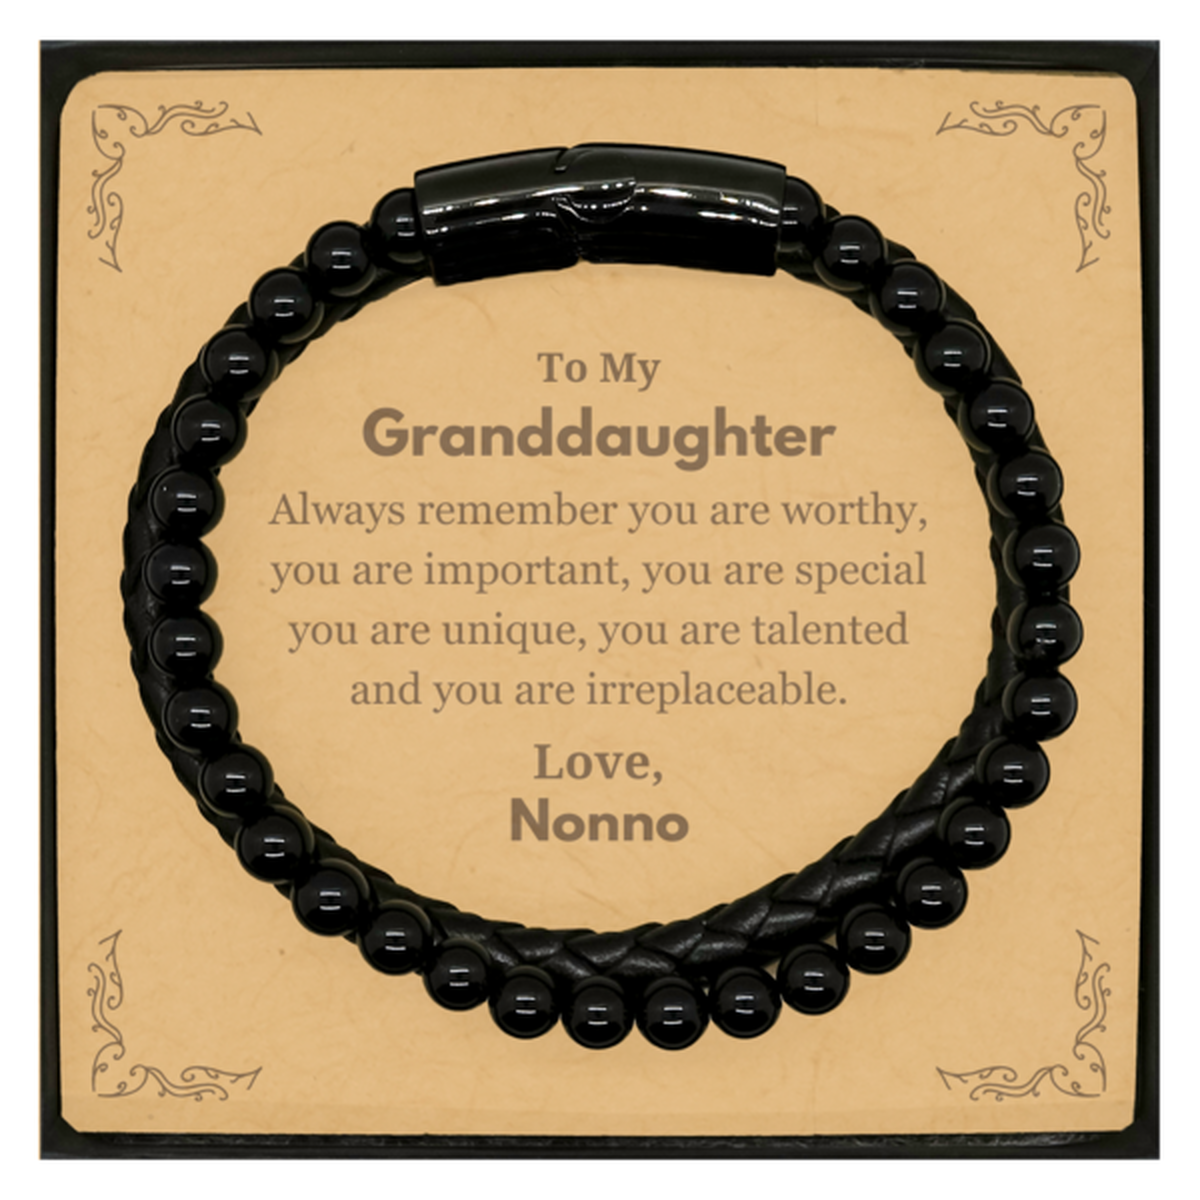 Granddaughter Birthday Gifts from Nonno, Inspirational Stone Leather Bracelets for Granddaughter Christmas Graduation Gifts for Granddaughter Always remember you are worthy, you are important. Love, Nonno